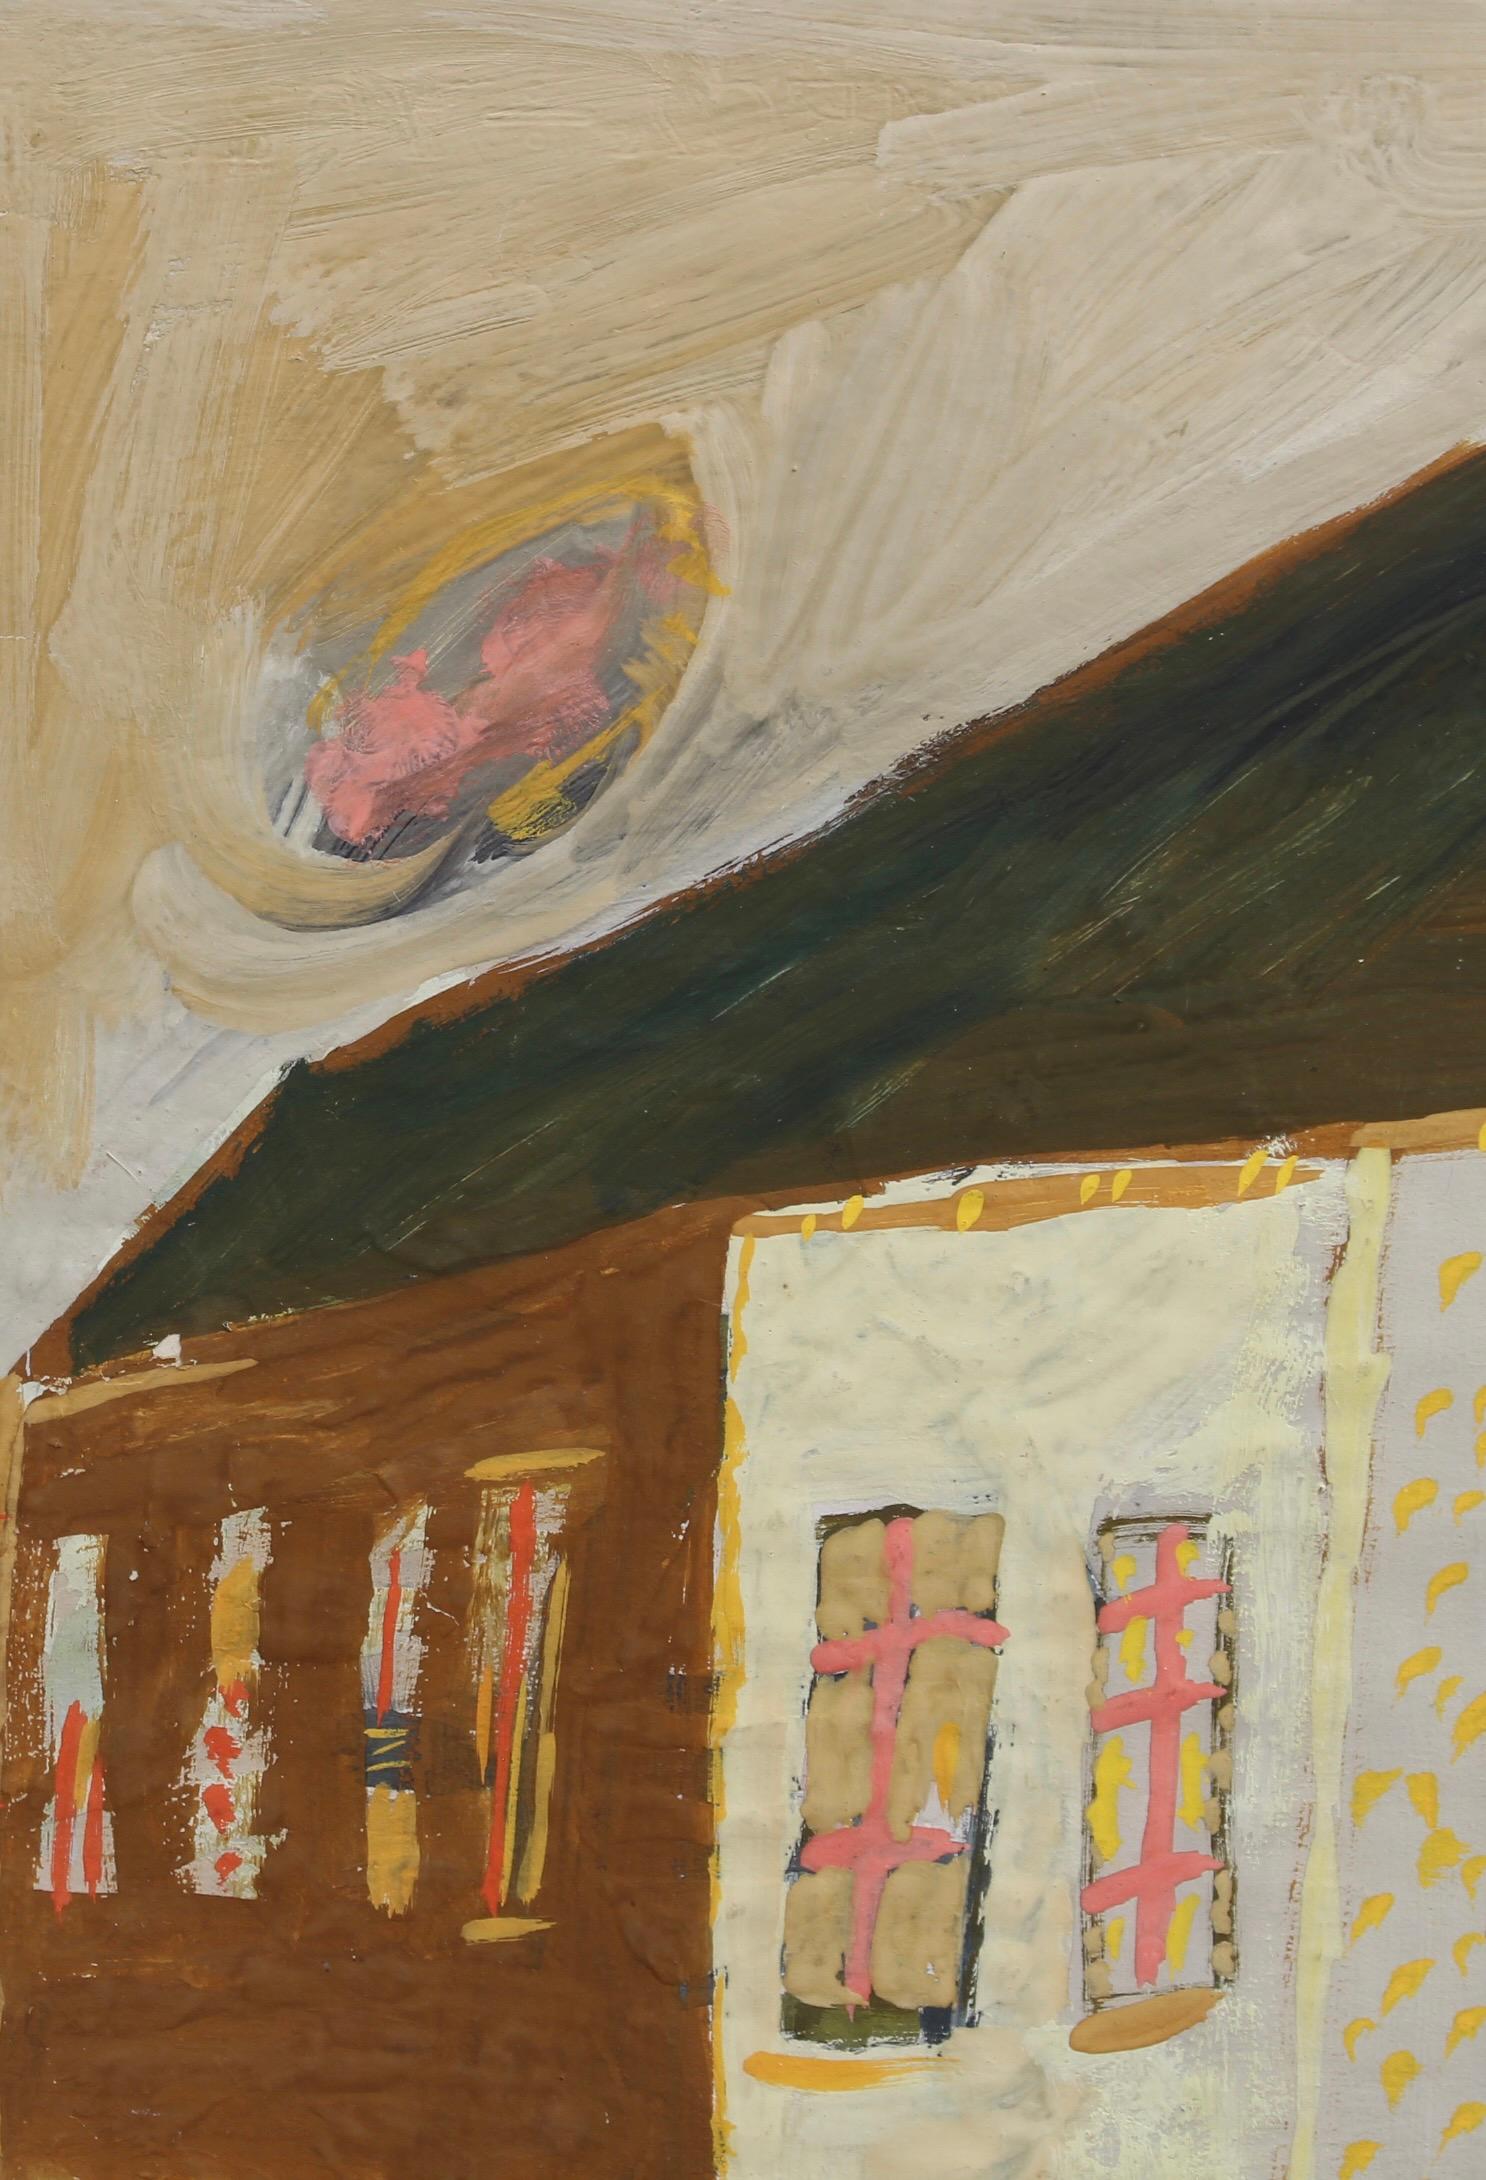 'Café de la Place', gouache on paper, by Raymond Debiève (circa 1970s). A solitary stroller in a small French town crosses the street in front of a café along with his dog. With several tricolour flags fluttering in the breeze, the small Place gives